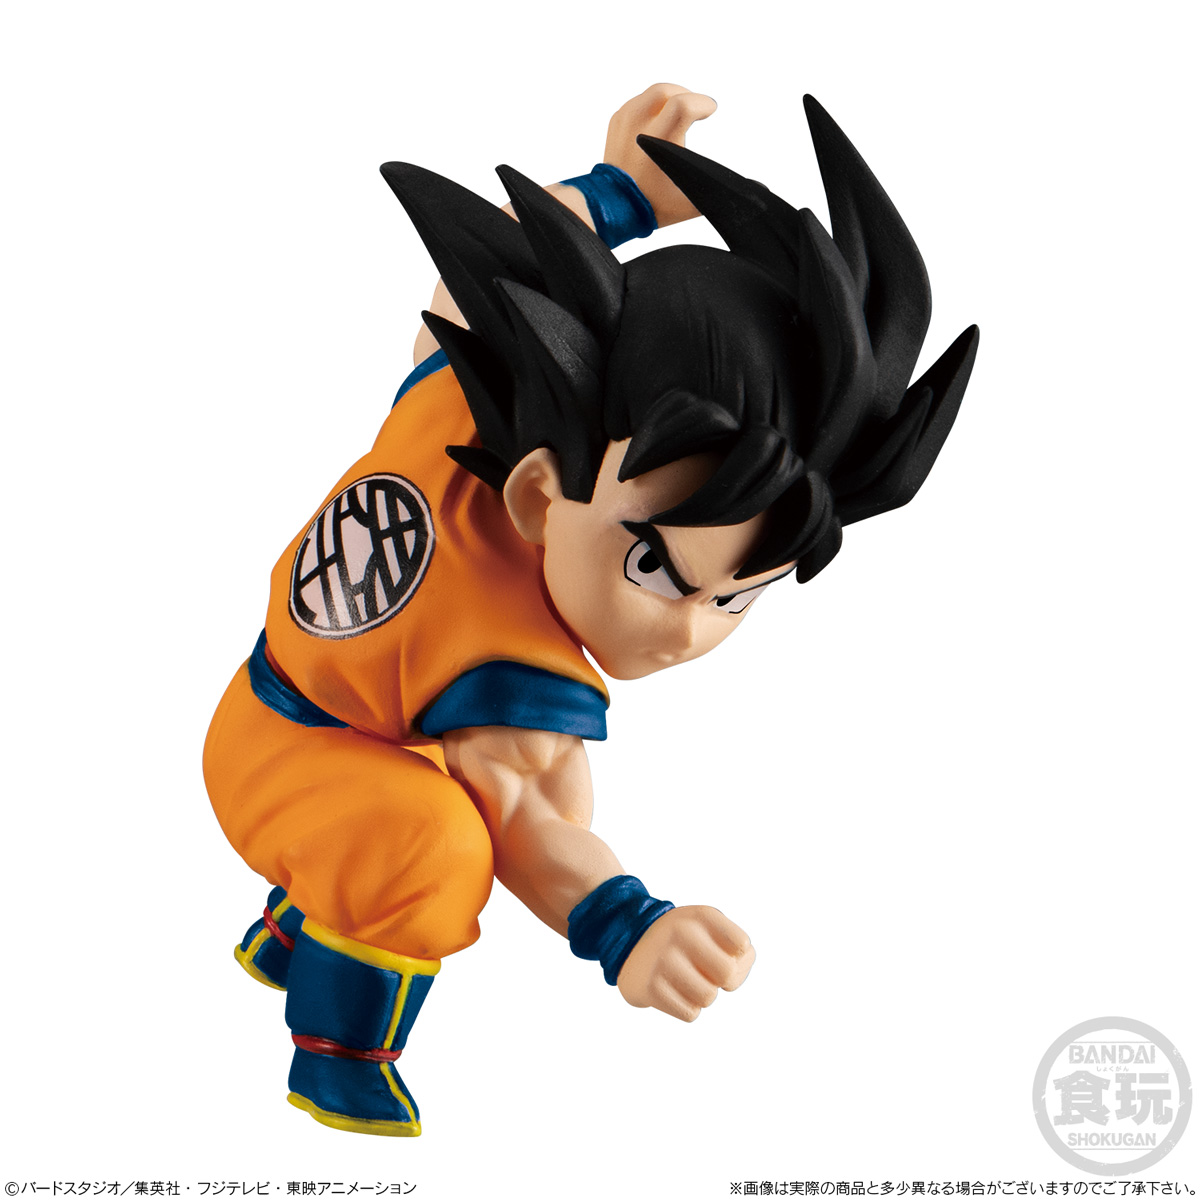 ADVERGE MOTION 5 Figure DRAGON BALL Super Candy Toy BANDAI